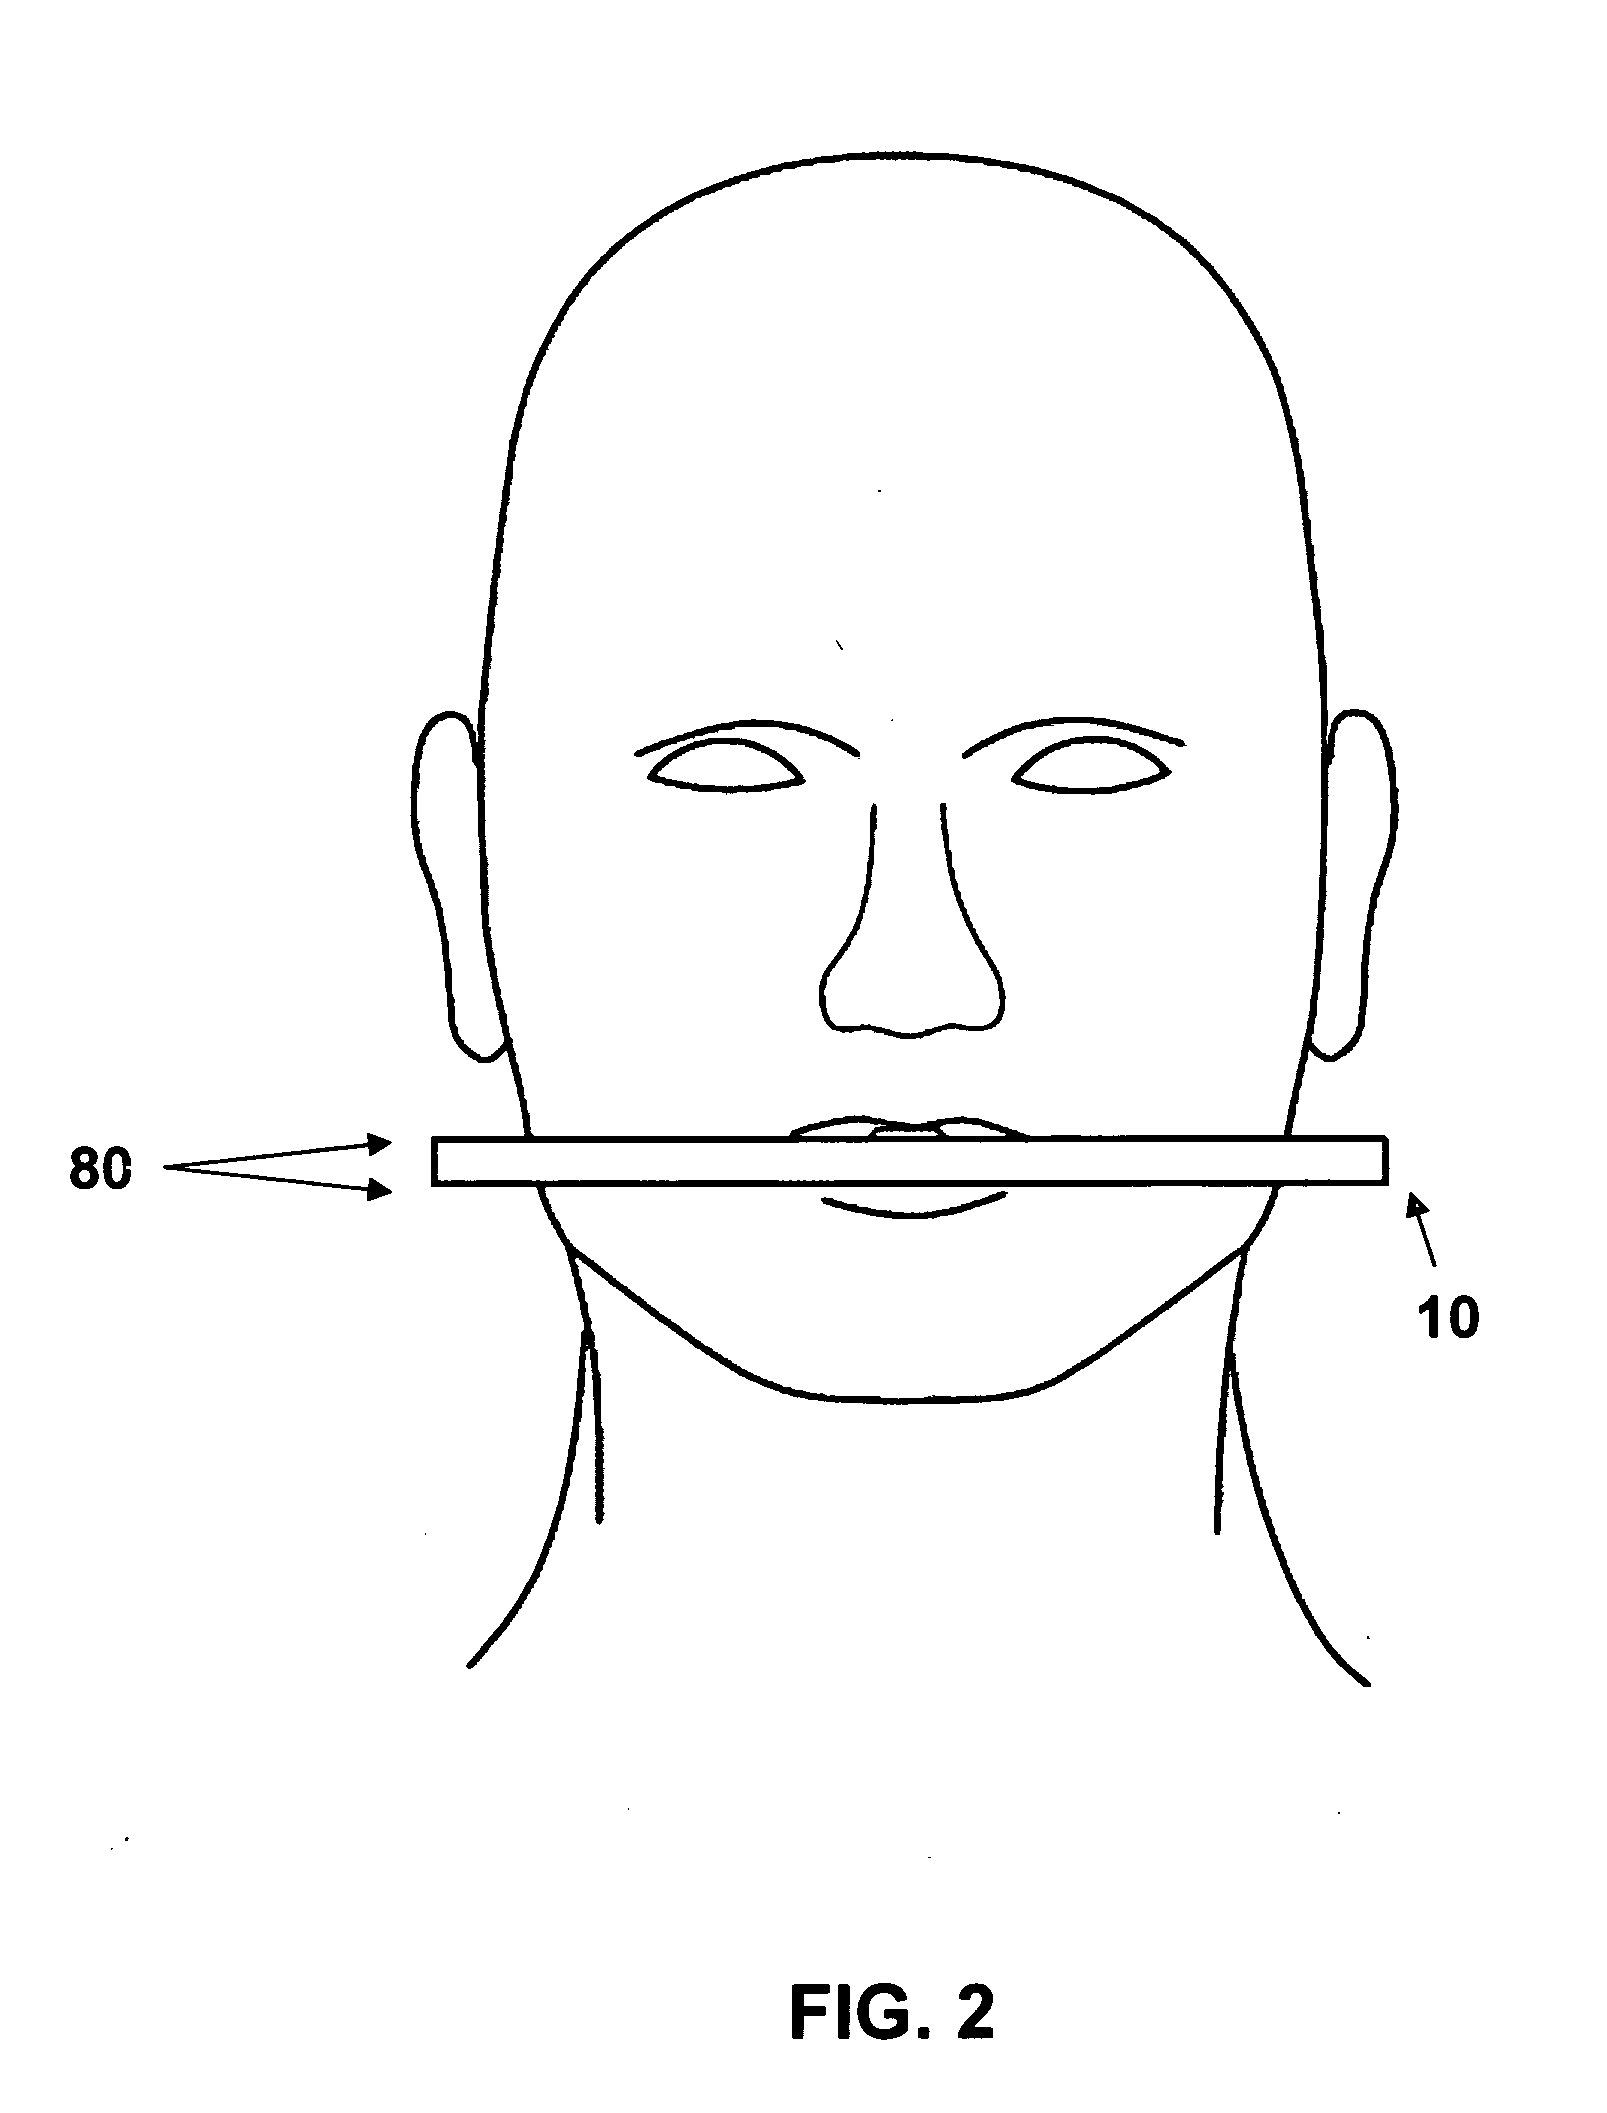 Novel method and device for positioning patients for dental imaging